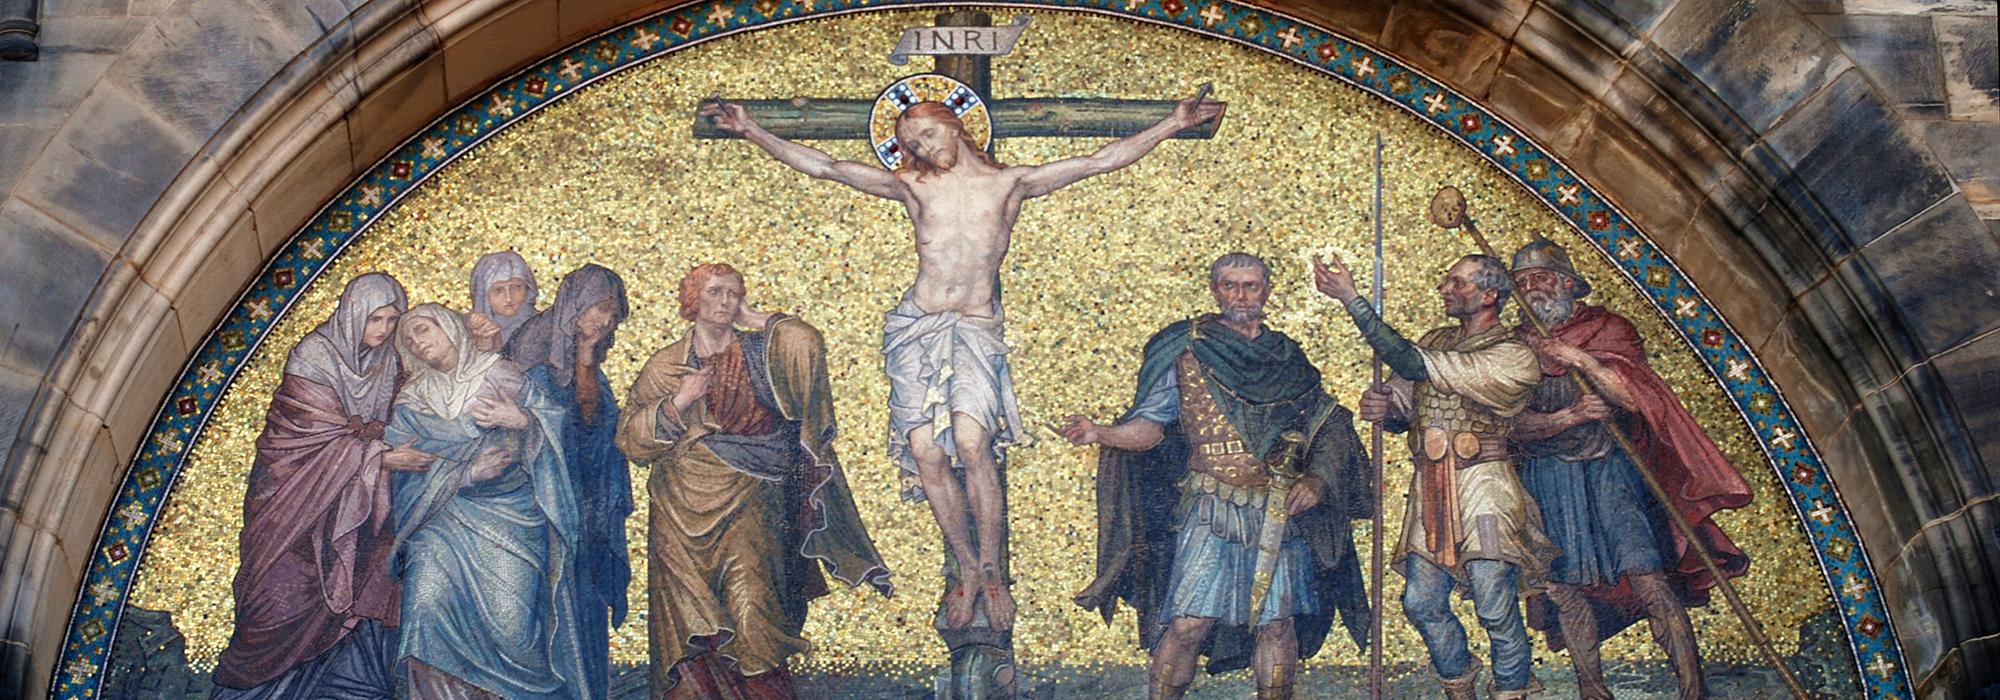 Mosaic on the facade of Bremen Cathedral showing the crucifixion of Christ - Photo: © Joaquim Alves Gaspar, via Wikimedia Commons, CC BY-SA 3.0